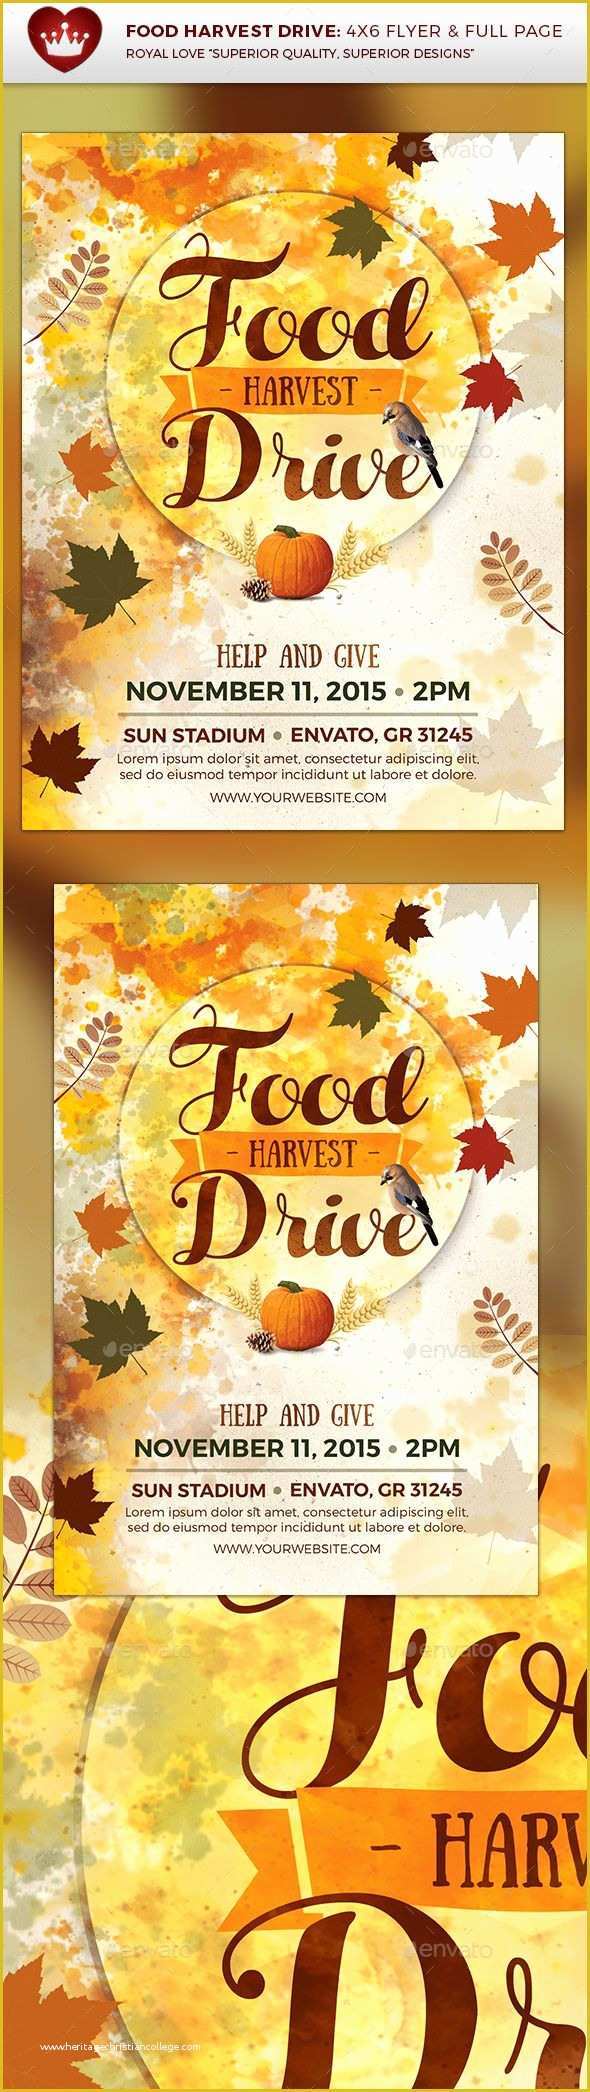 Free Thanksgiving Food Drive Flyer Template Of 17 Best Food Pantry Images On Pinterest